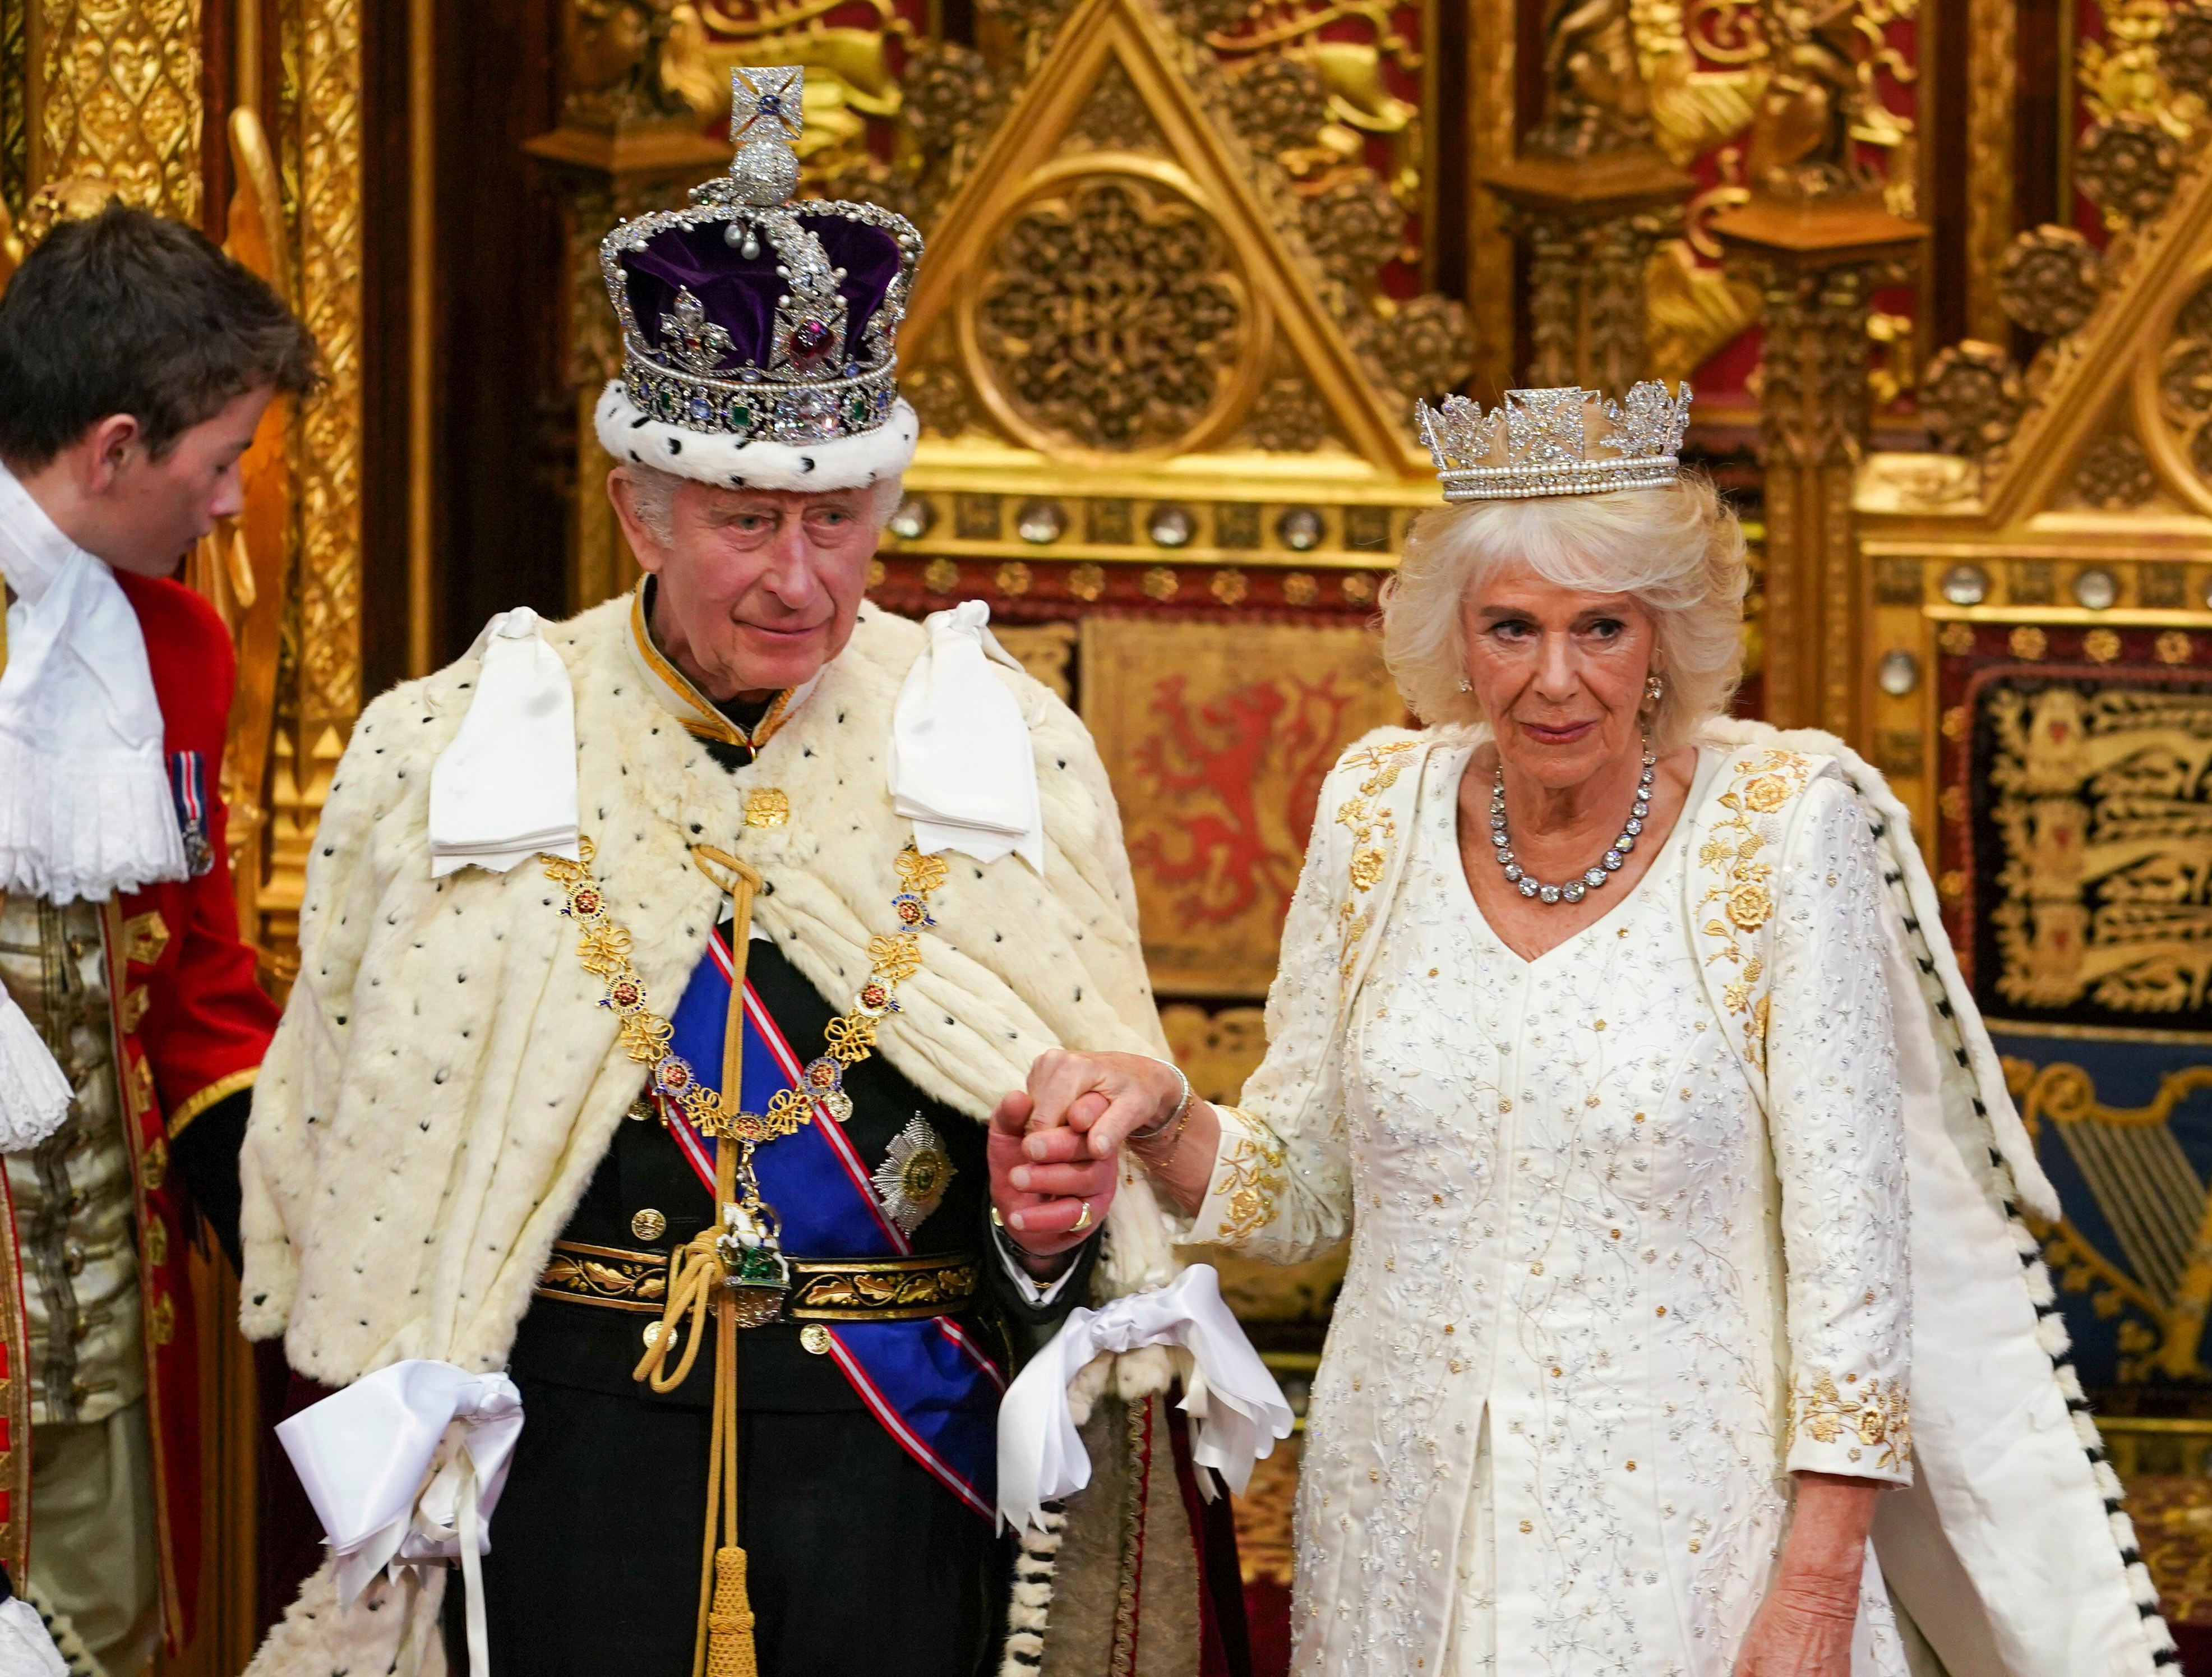 <p><span>King Charles III prepared to read the King's speech at the State Opening of Parliament, accompanied by Queen Camilla, in London on Nov. 7, 2023. </span></p><p>It marked the first State Opening of Parliament to take place during Charles's reign. He wore the Imperial State Crown and she donned the Diamond Diadem for the first time. Camilla also re-wore her Bruce Oldfield-designed <a href="https://www.wonderwall.com/celebrity/the-coronation-of-king-charles-iii-and-queen-camilla-the-best-pictures-of-all-the-royals-at-this-historic-event-735015.gallery">coronation</a> gown. </p><p>See the best photos of Charles and Camilla from the event -- including closeups of her glittering diadem that was closely associated with Queen Elizabeth II for decades -- <a href="https://www.wonderwall.com/entertainment/king-charles-iii-first-days-as-britains-new-monarch-camilla-queen-consort-after-death-of-queen-elizabeth-648801.gallery">here</a>.</p>